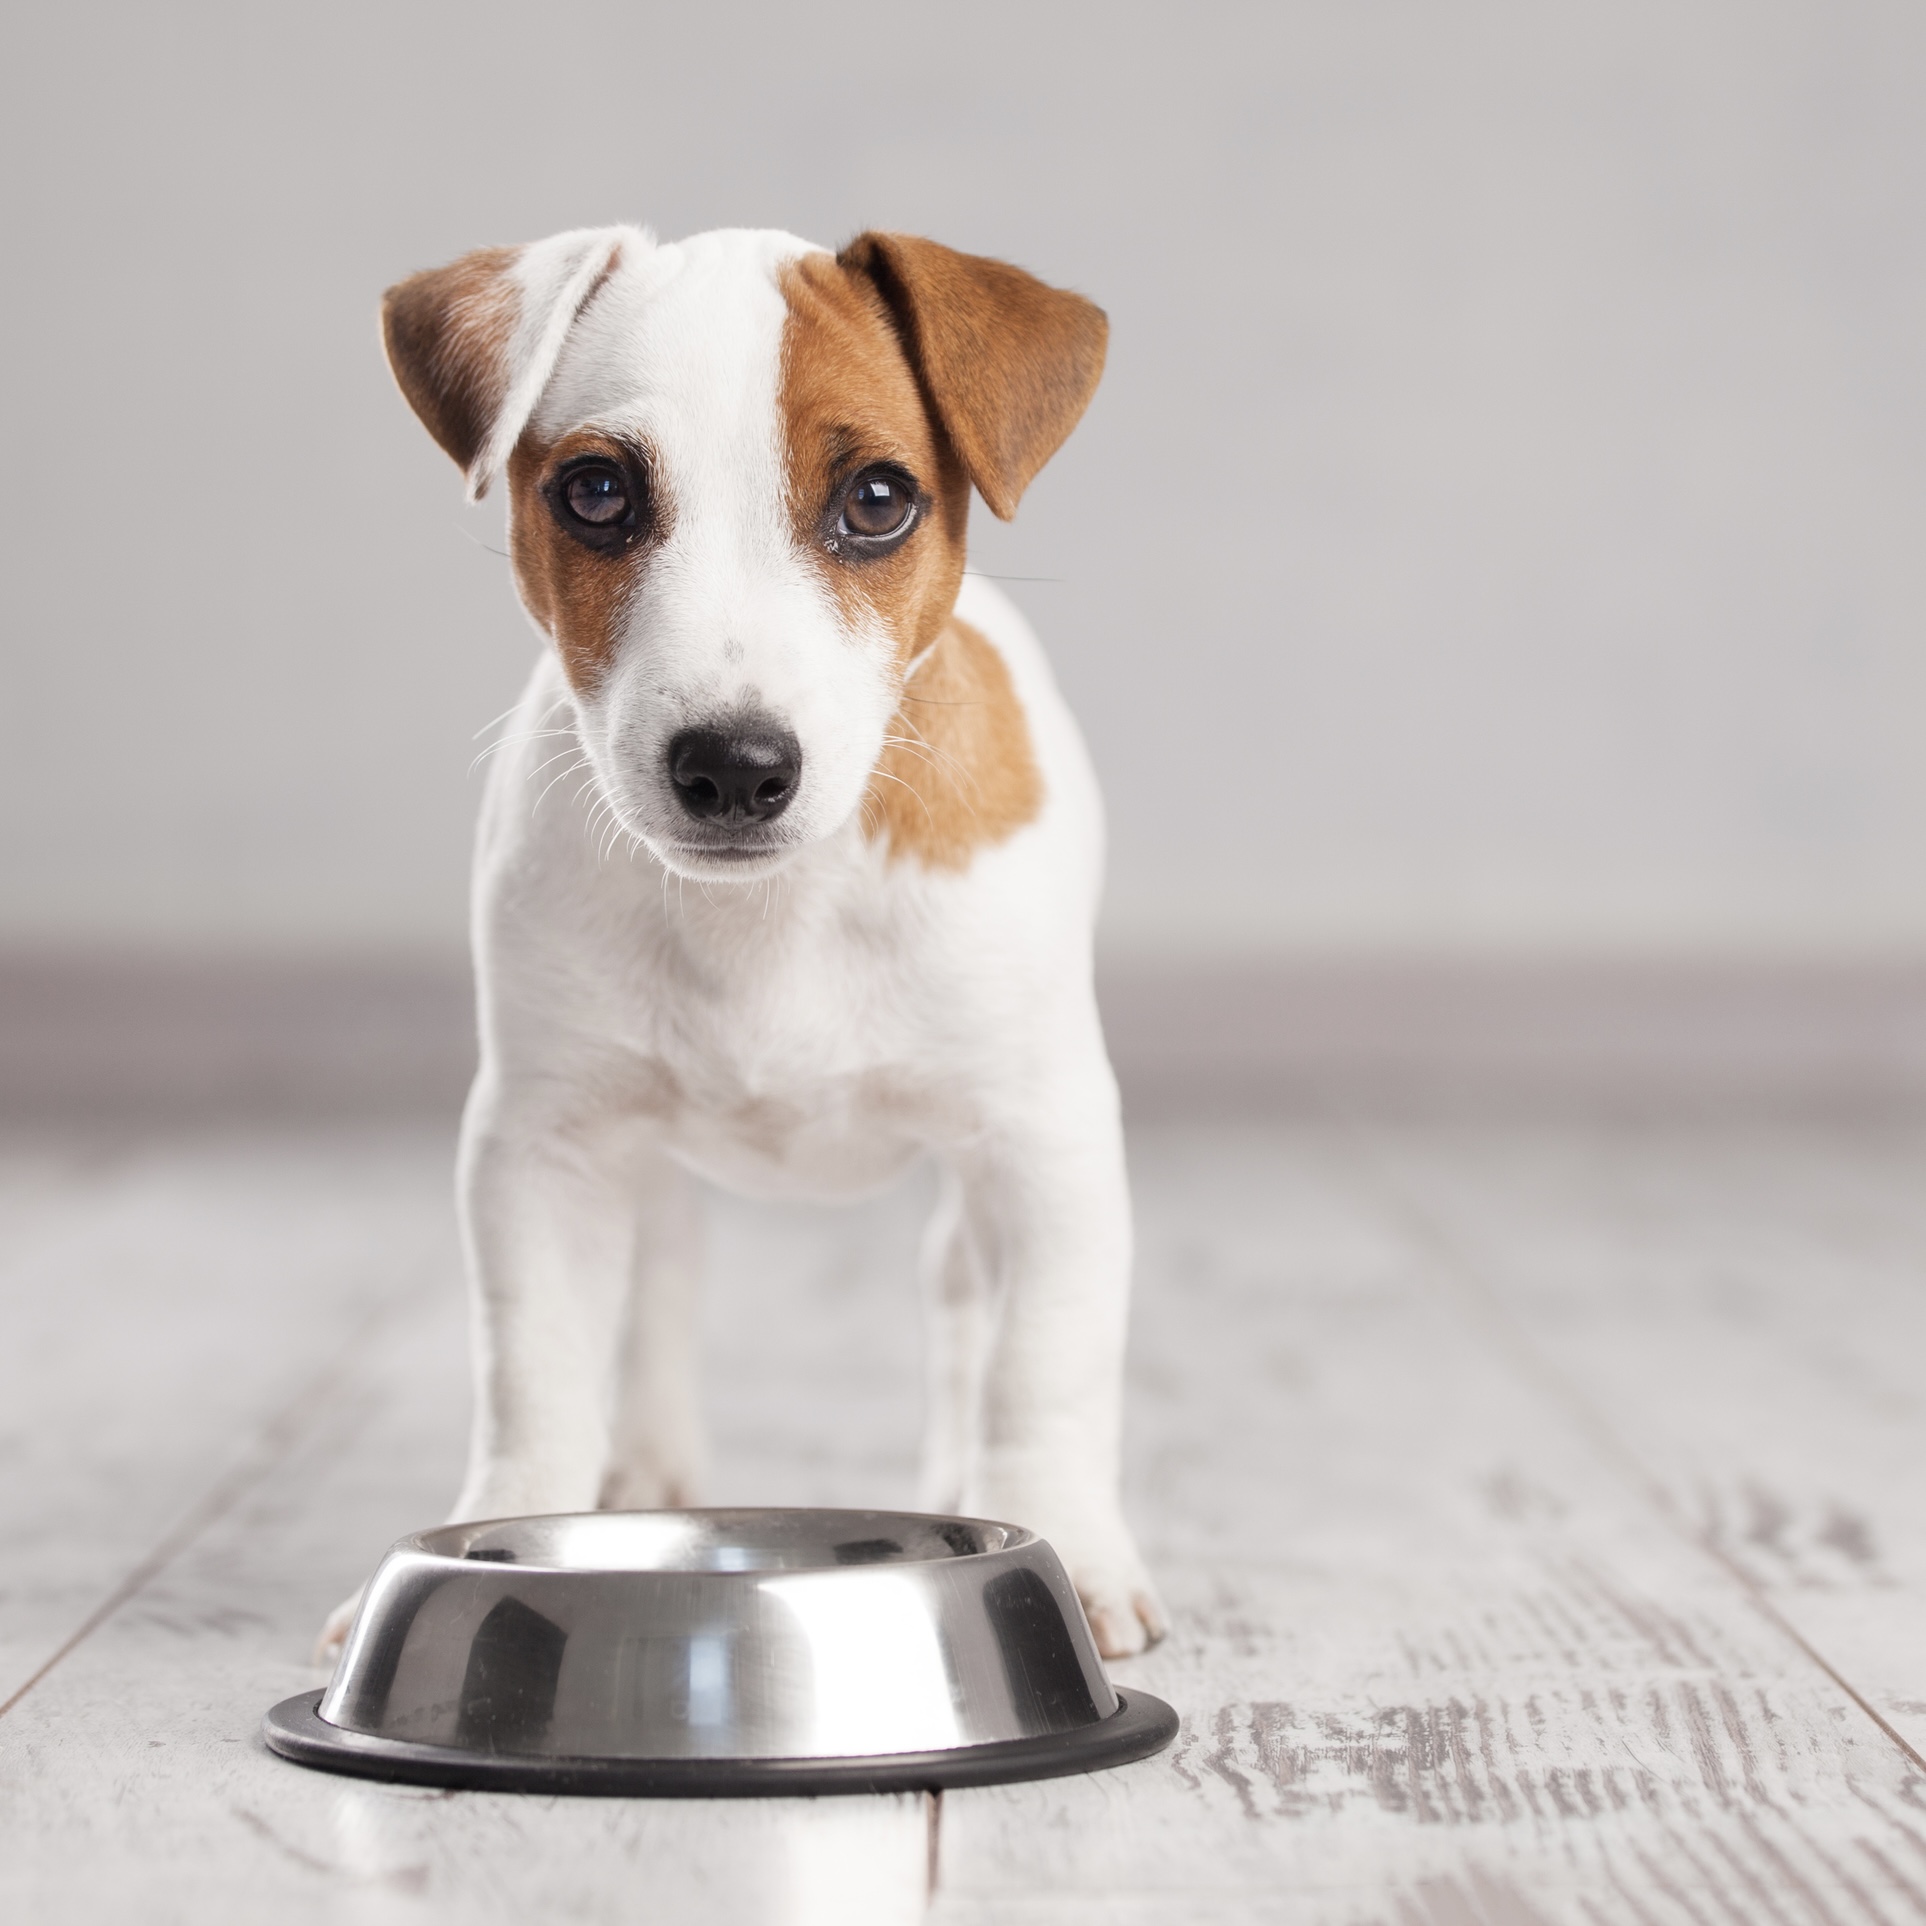 Slow Feed Options For Dogs Eating Too Fast